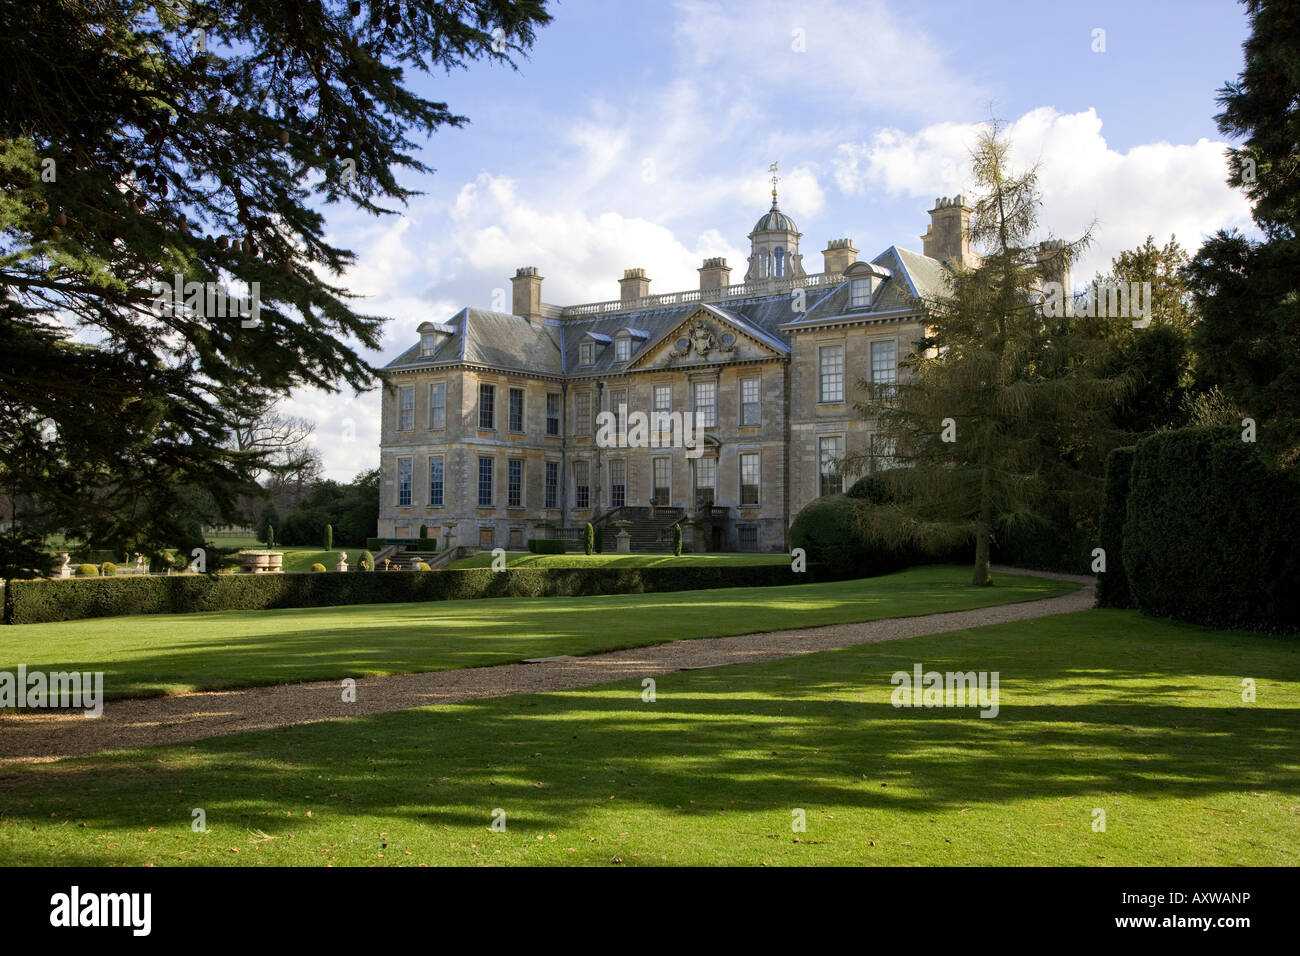 Belton House Grantham, Lincolnshire, Angleterre, Royaume-Uni Banque D'Images